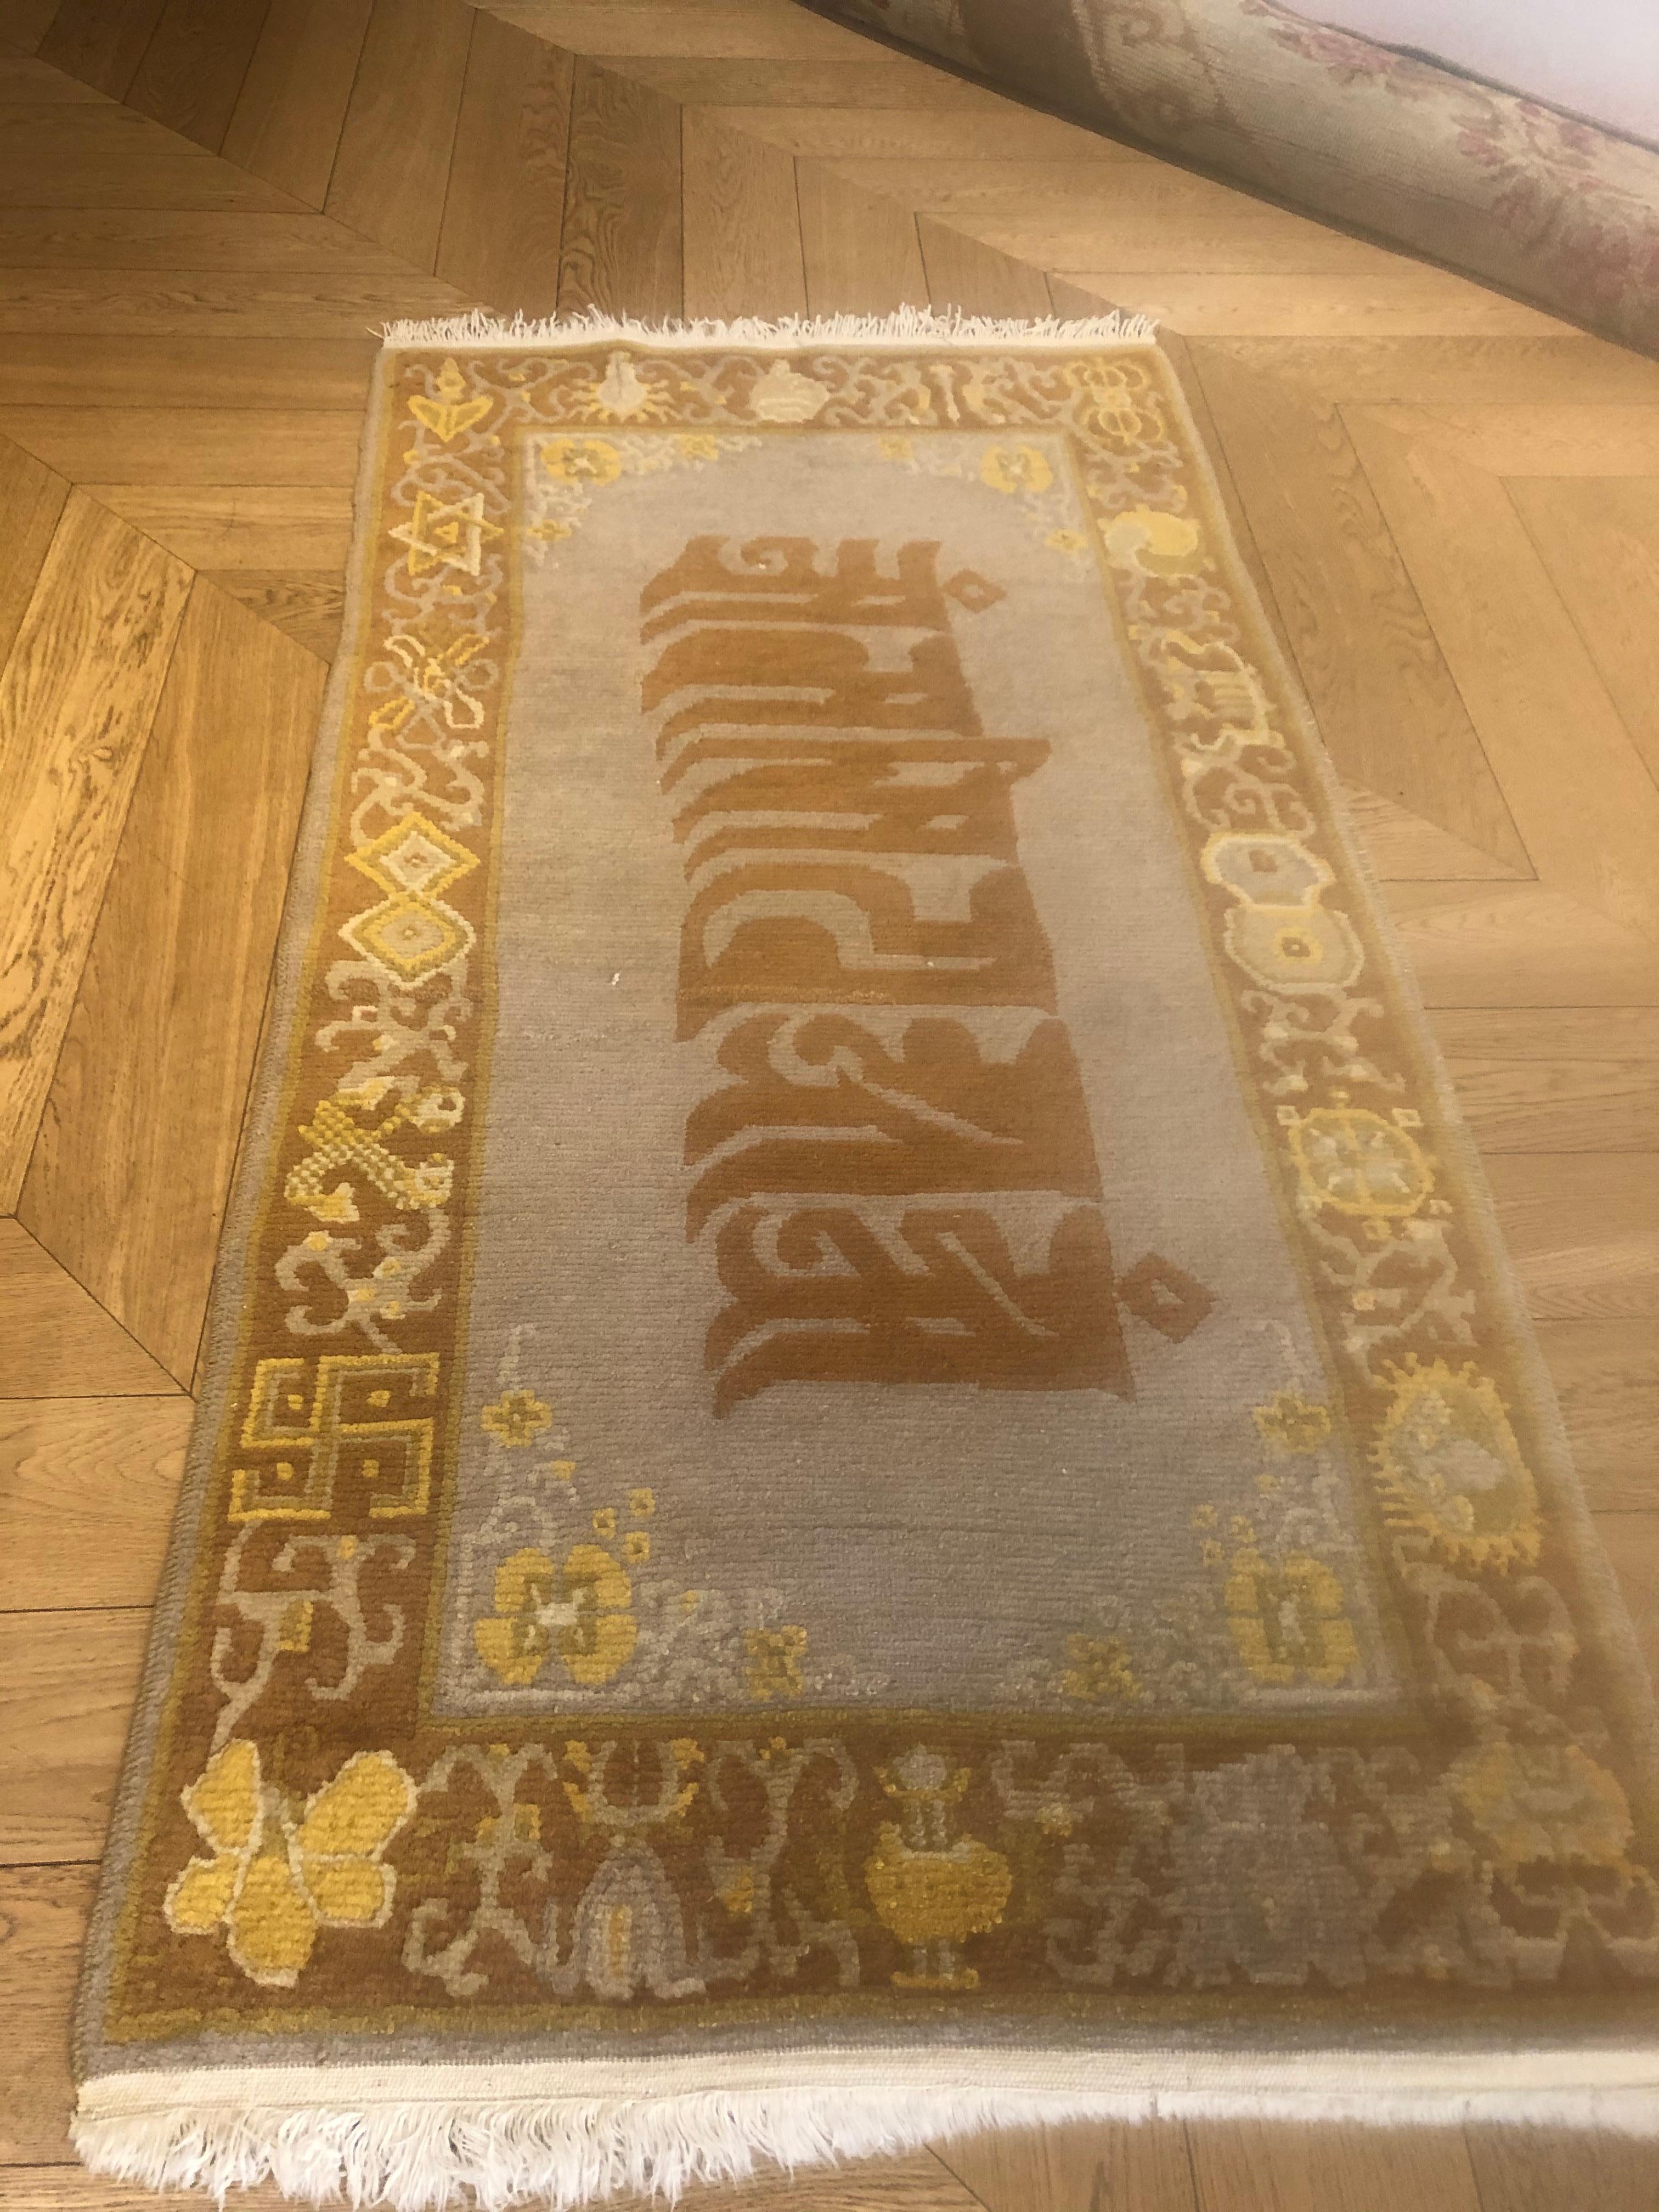 Carpet made of Tibet for the Nepalese market.
These carpets with mystical content were made for the Communities of the Nepalese Buddhist temples.
These carpets accompany the monks in their daily exercises.
In the centre of the carpet, we find the